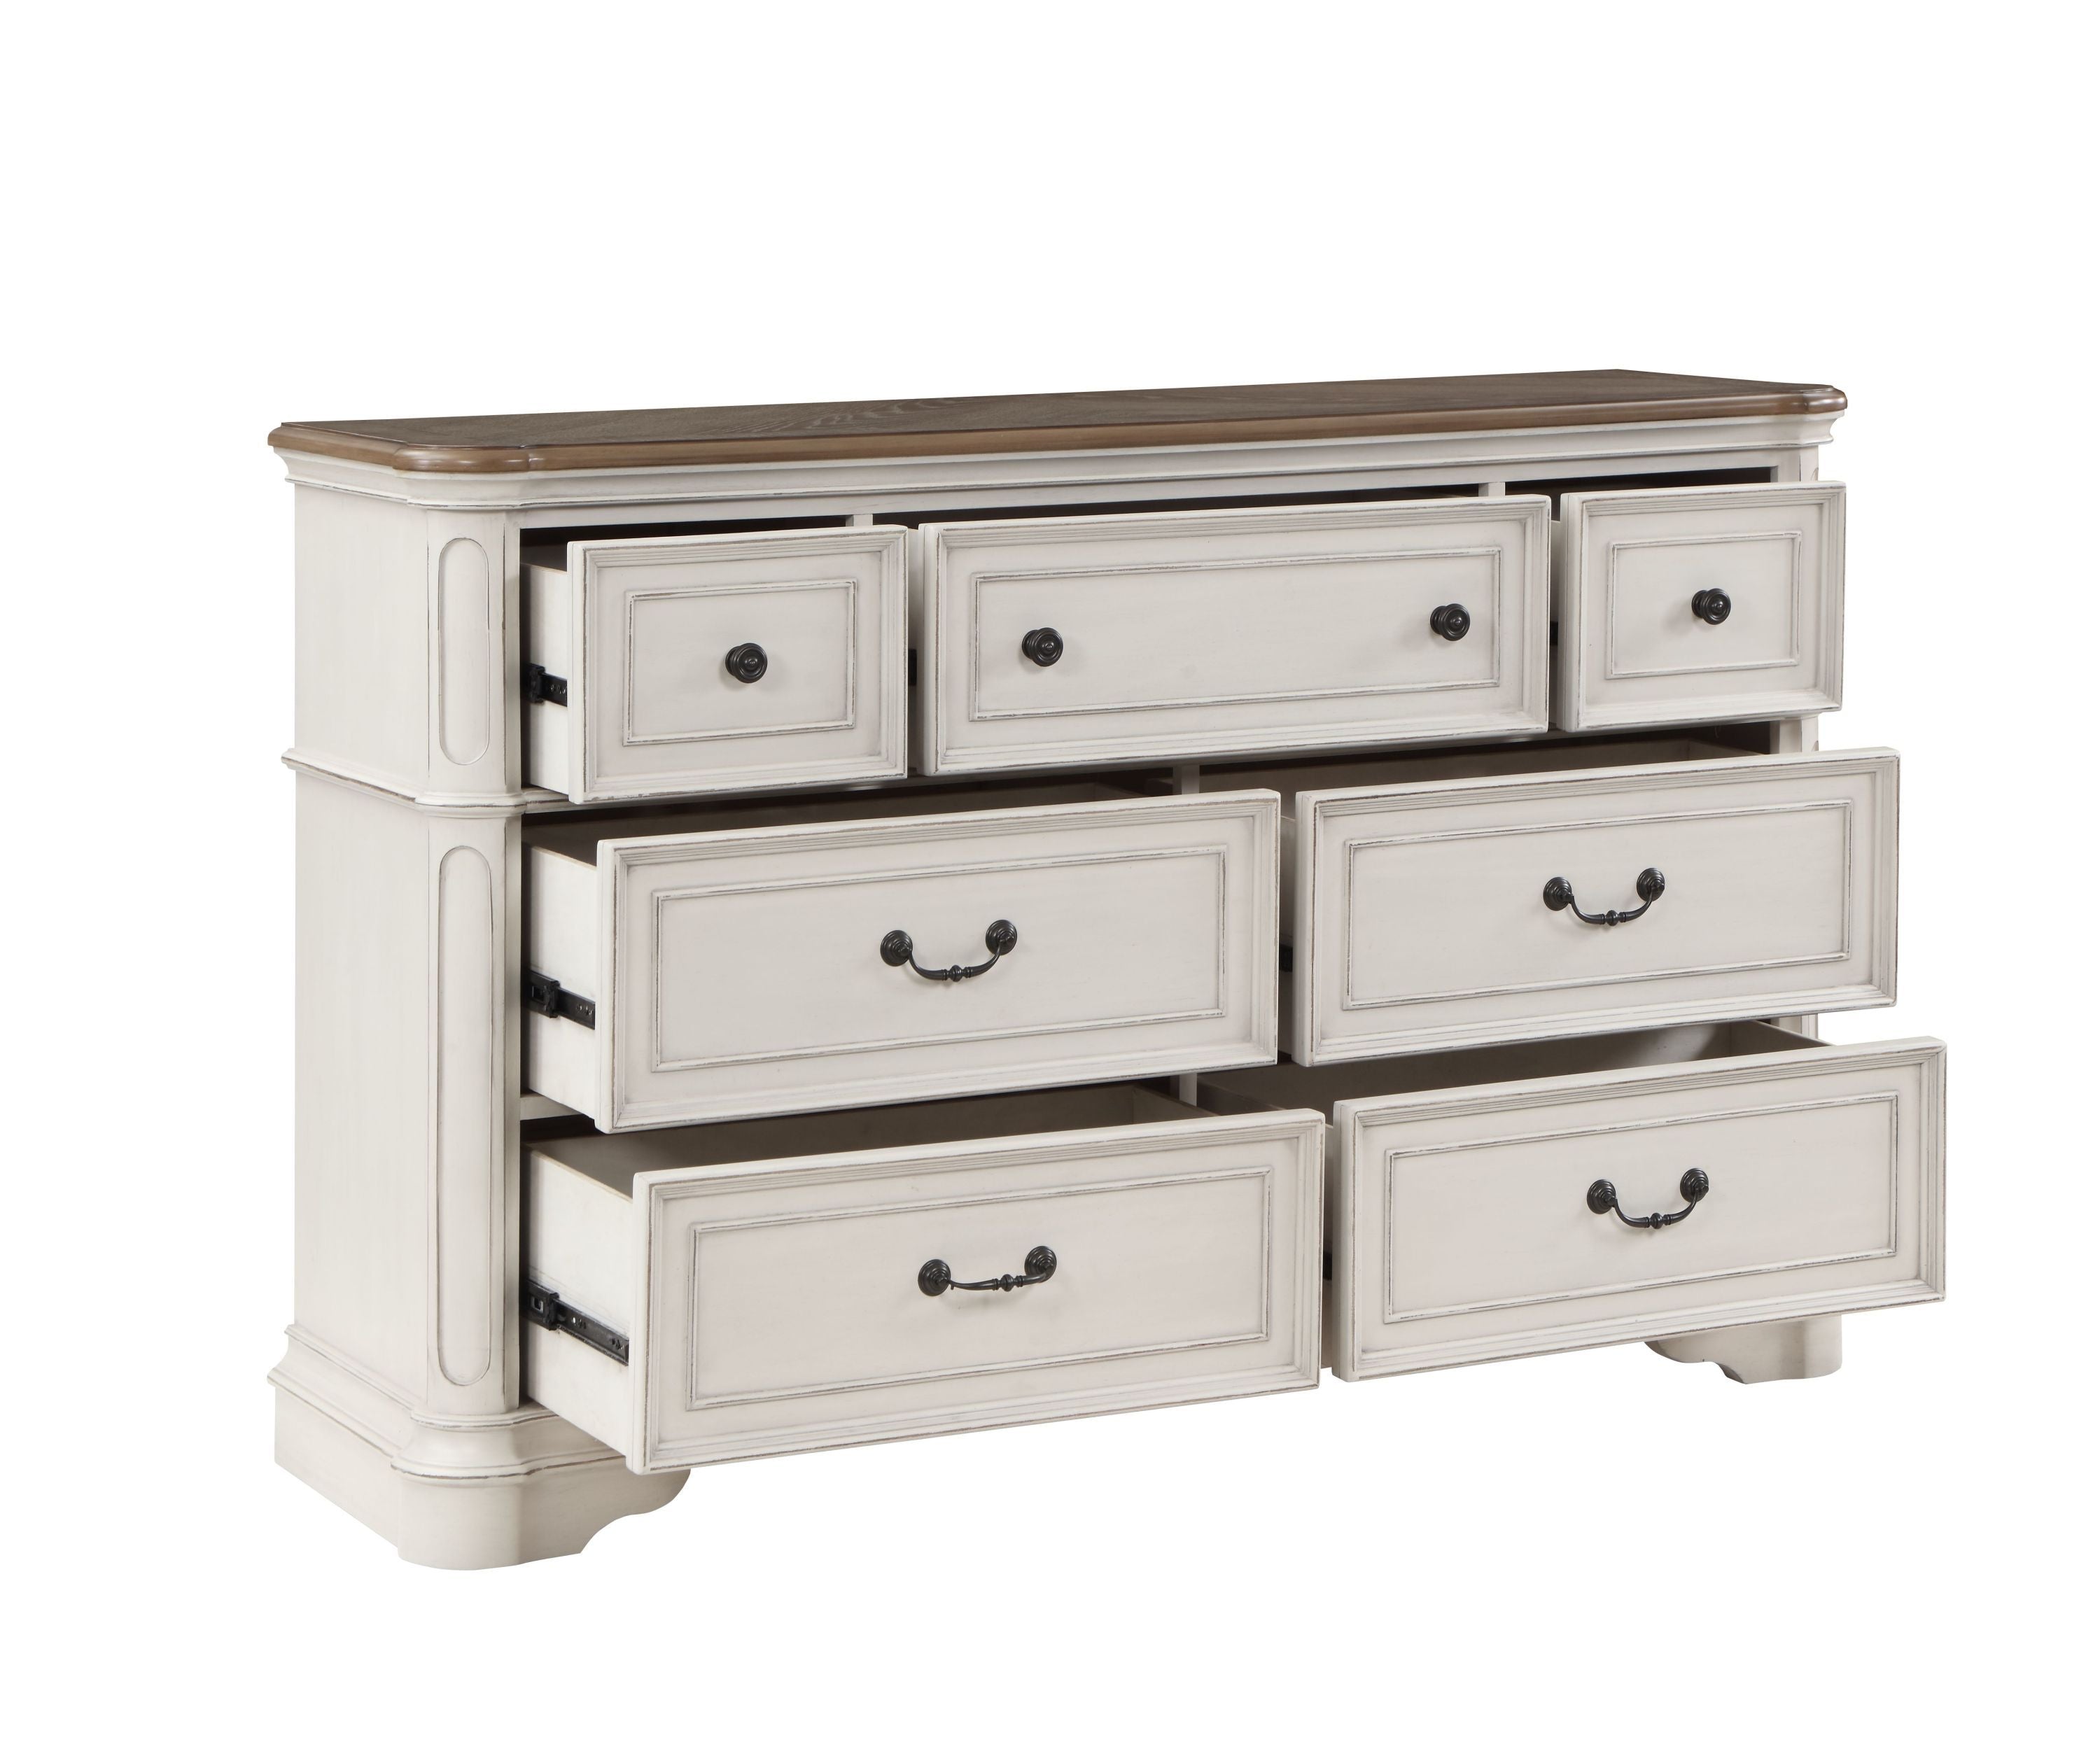 French Style Dresser - Gray Fabric & Antique White Finish